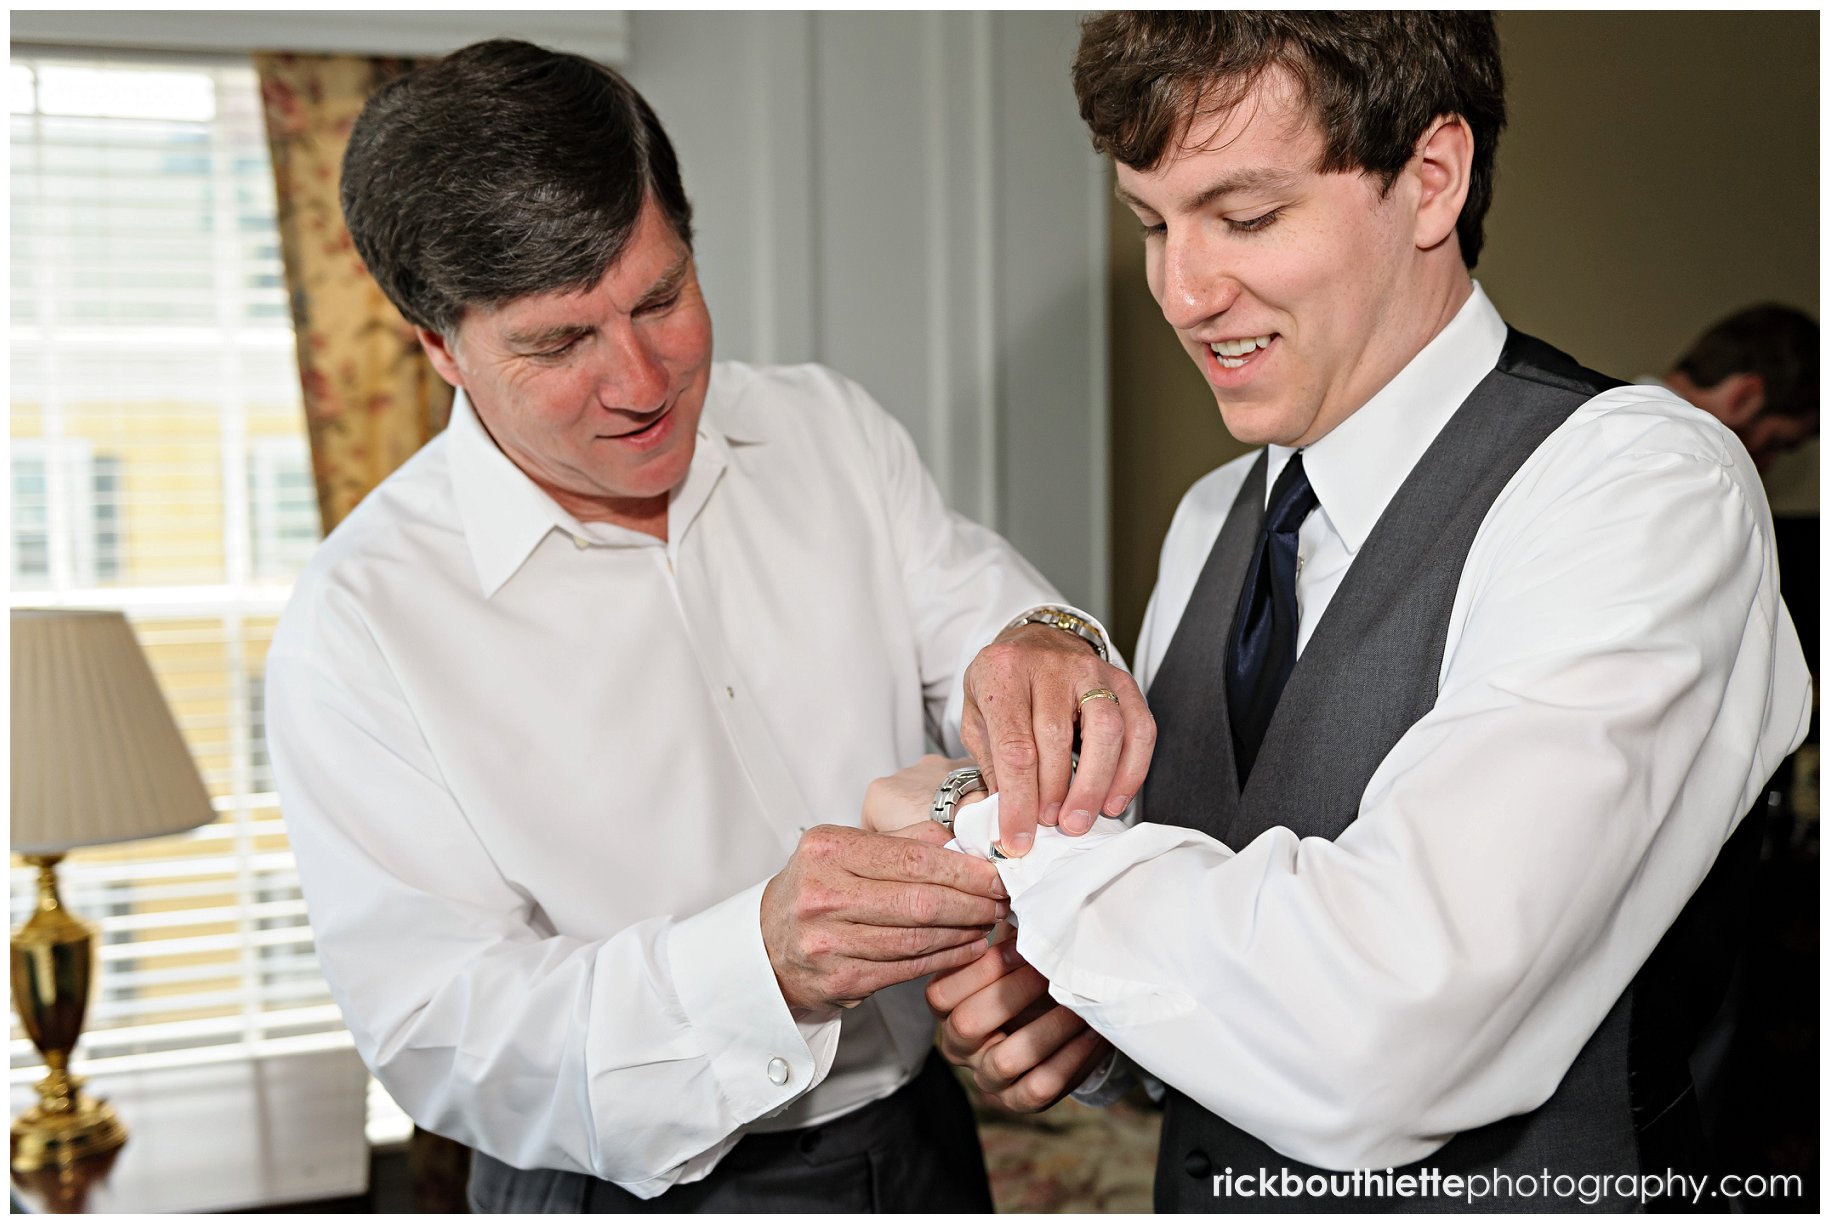 Dad helps groom with cufflinks